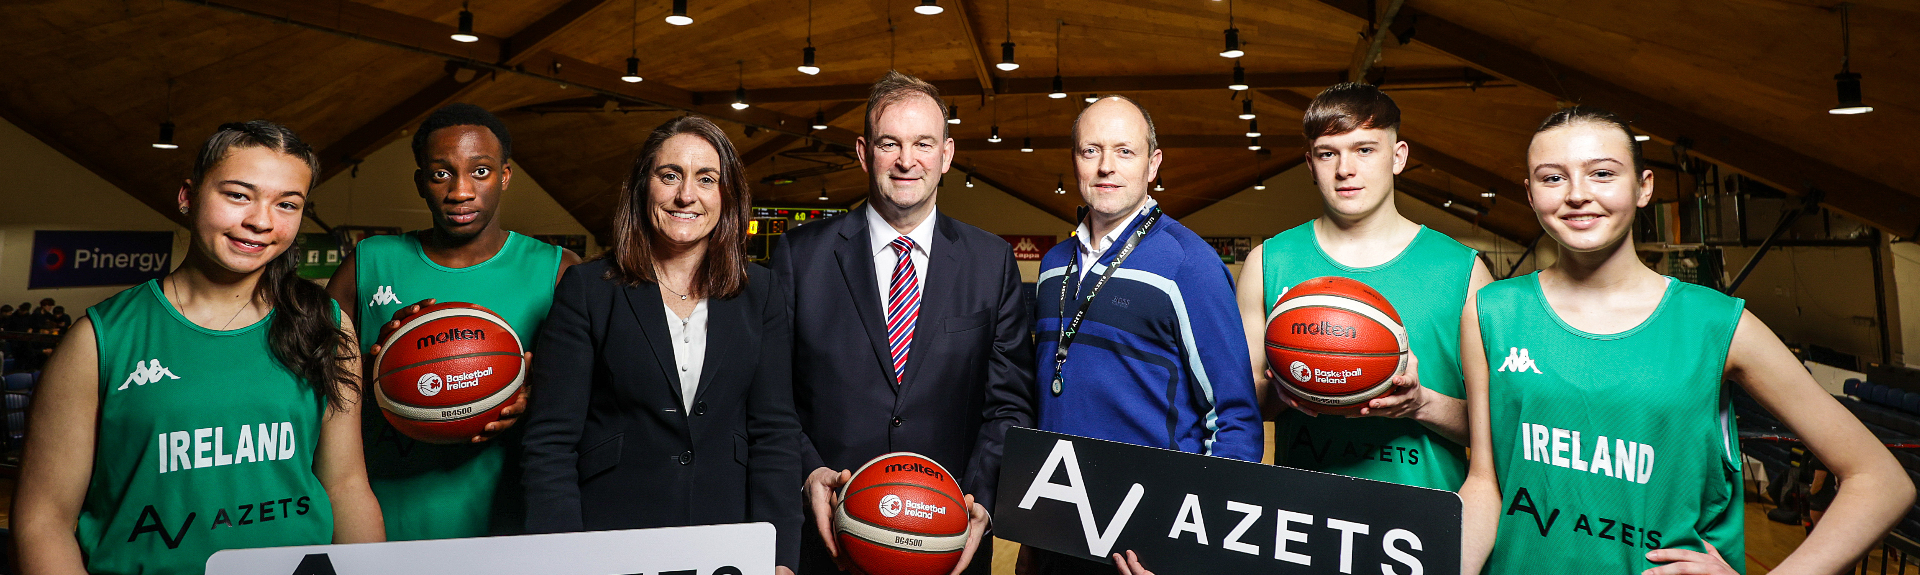 Azets announces two-year sponsorship deal with Basketball Ireland Image